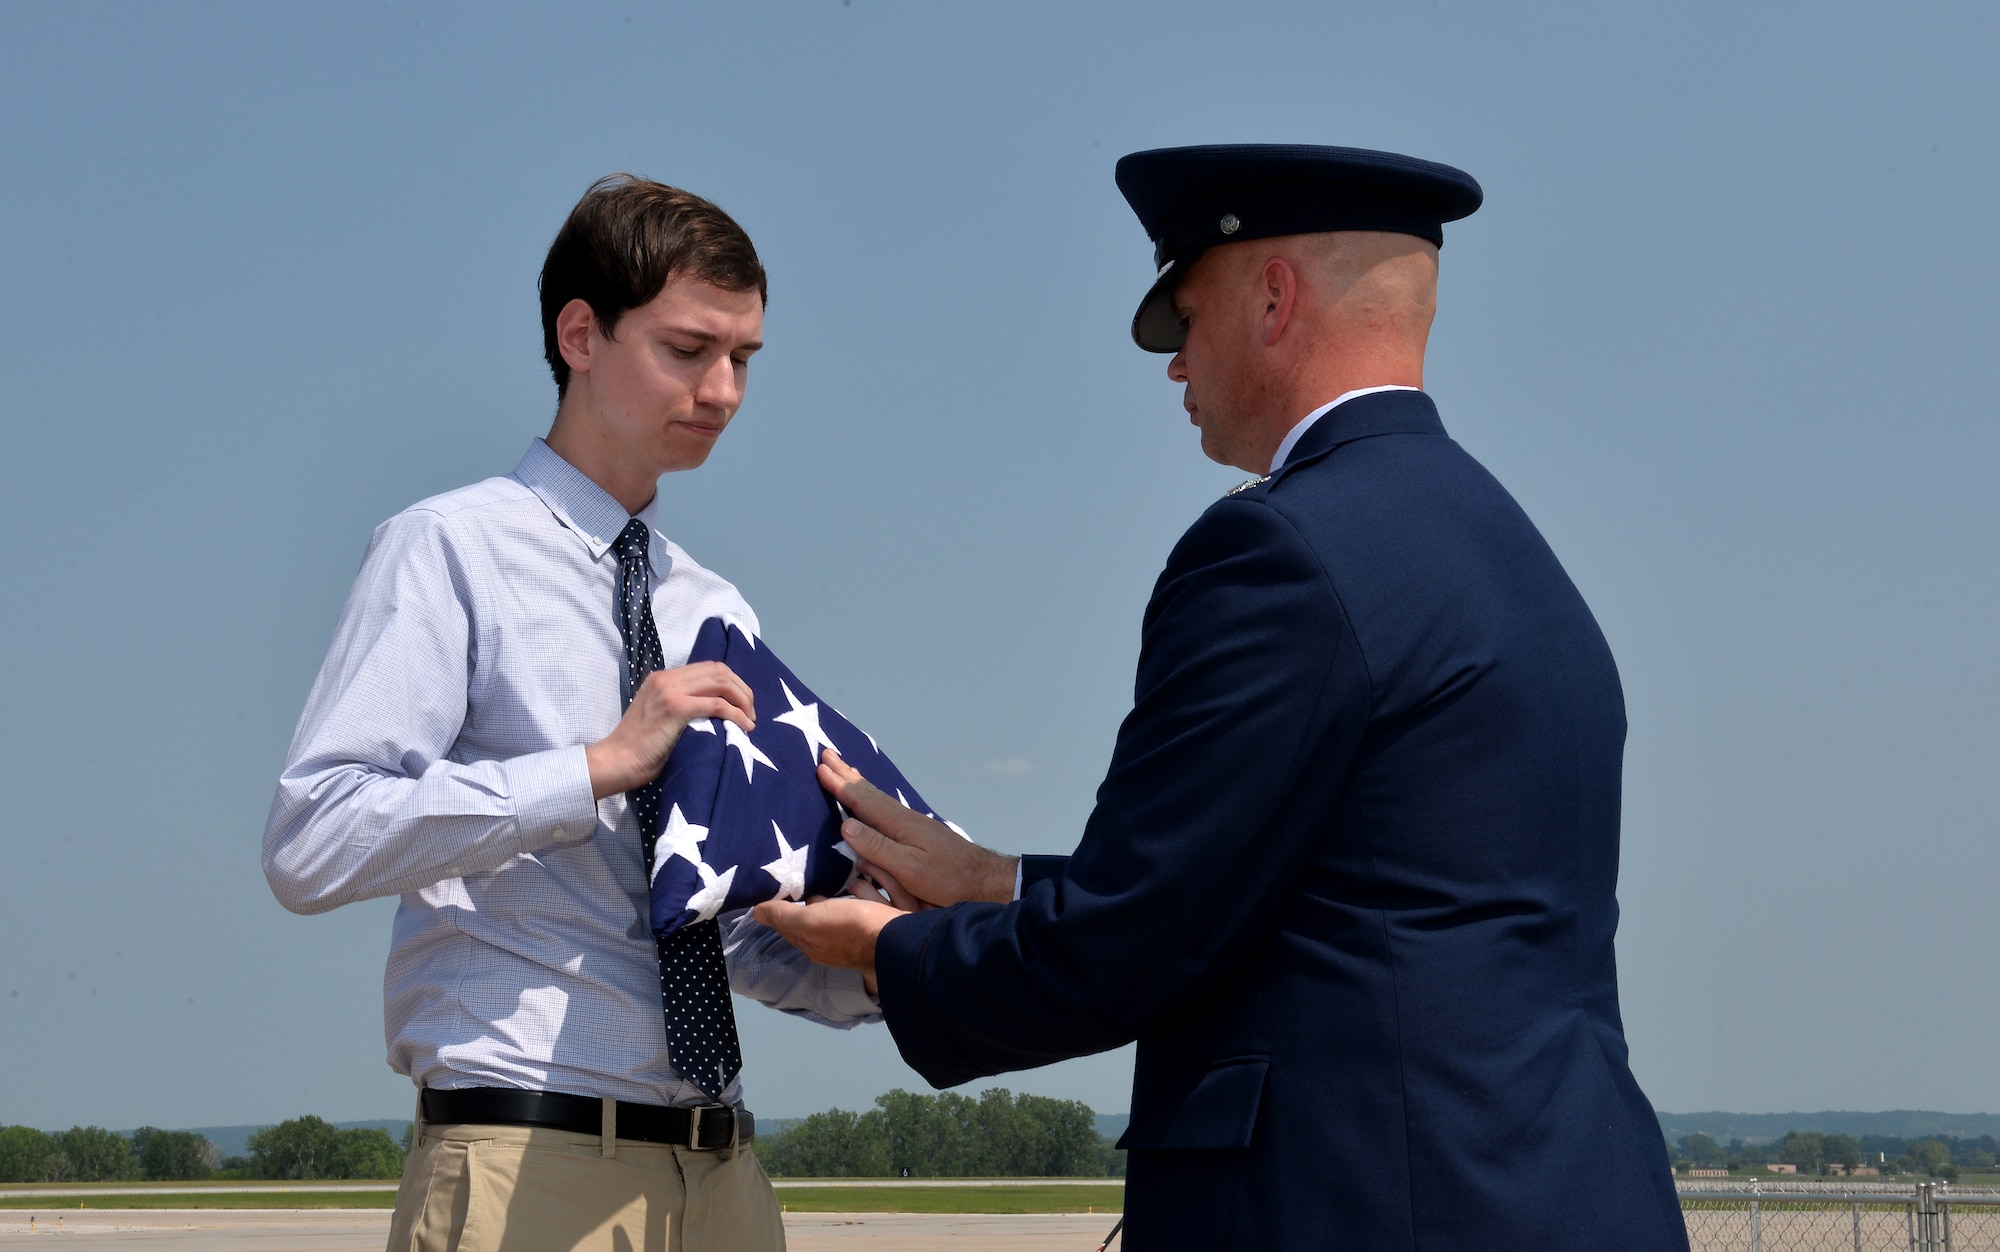 Col. Michael Manion, 55th Wing commander, hands John Offutt an American flag as part of a ceremony held Aug. 12, 2018 during the Defenders of Freedom Air and Space Show at Offutt Air Force Base, Nebraska. The ceremony honored the late Lt. Jarvis Offutt who the base is named after. He was the first Omaha native to die in WWI when his plane was shot down over France 100 years ago. John Offutt is the great-great nephew of Lt. Jarvis Offutt and recently returned to the area to attend University of Nebraska Omaha. (U.S. Air Force photo by Josh Plueger)